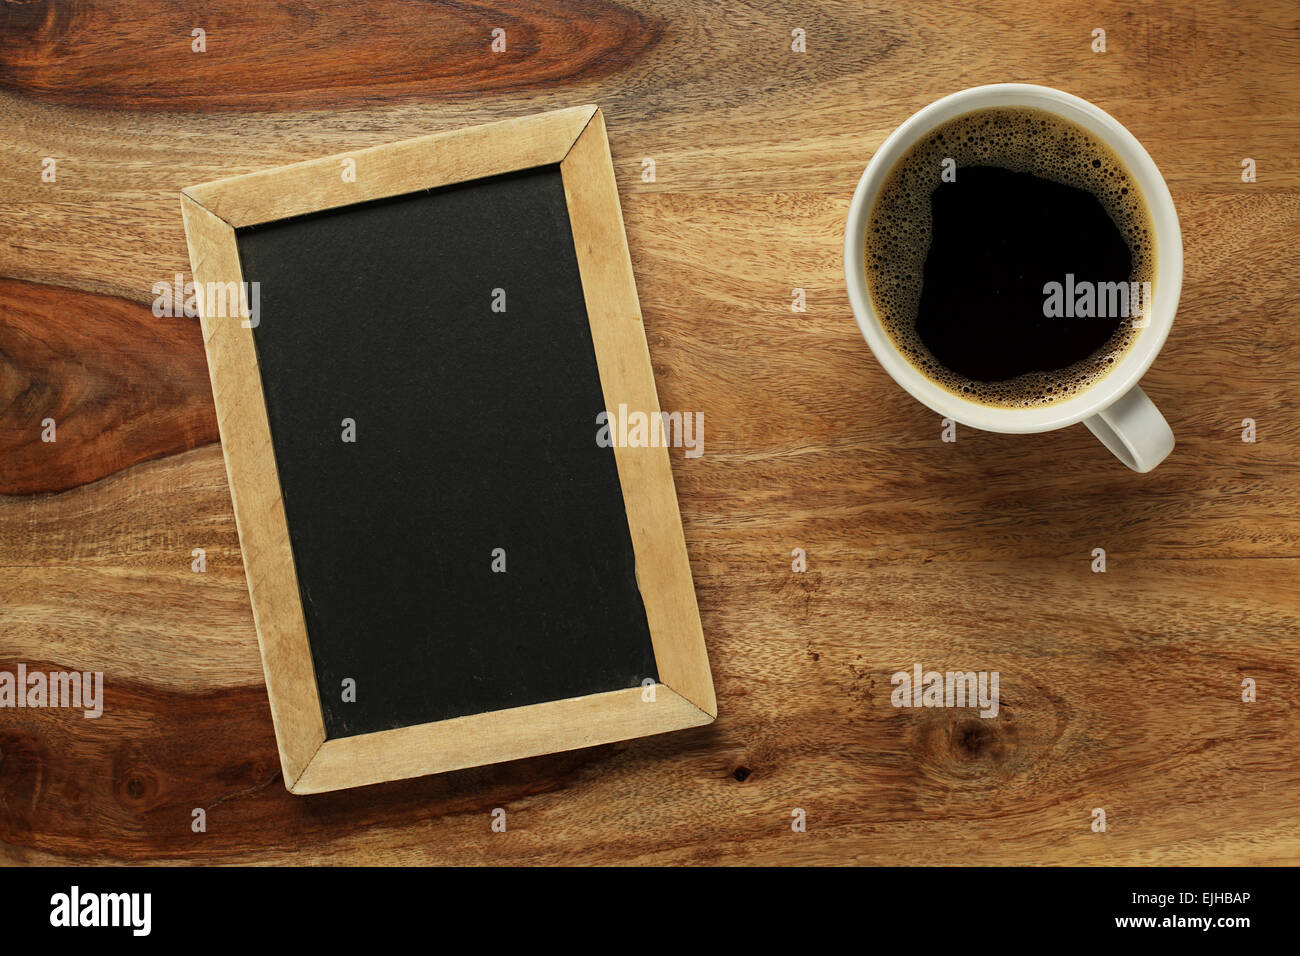 Cup of coffee on desk with blank chalkboard Stock Photo